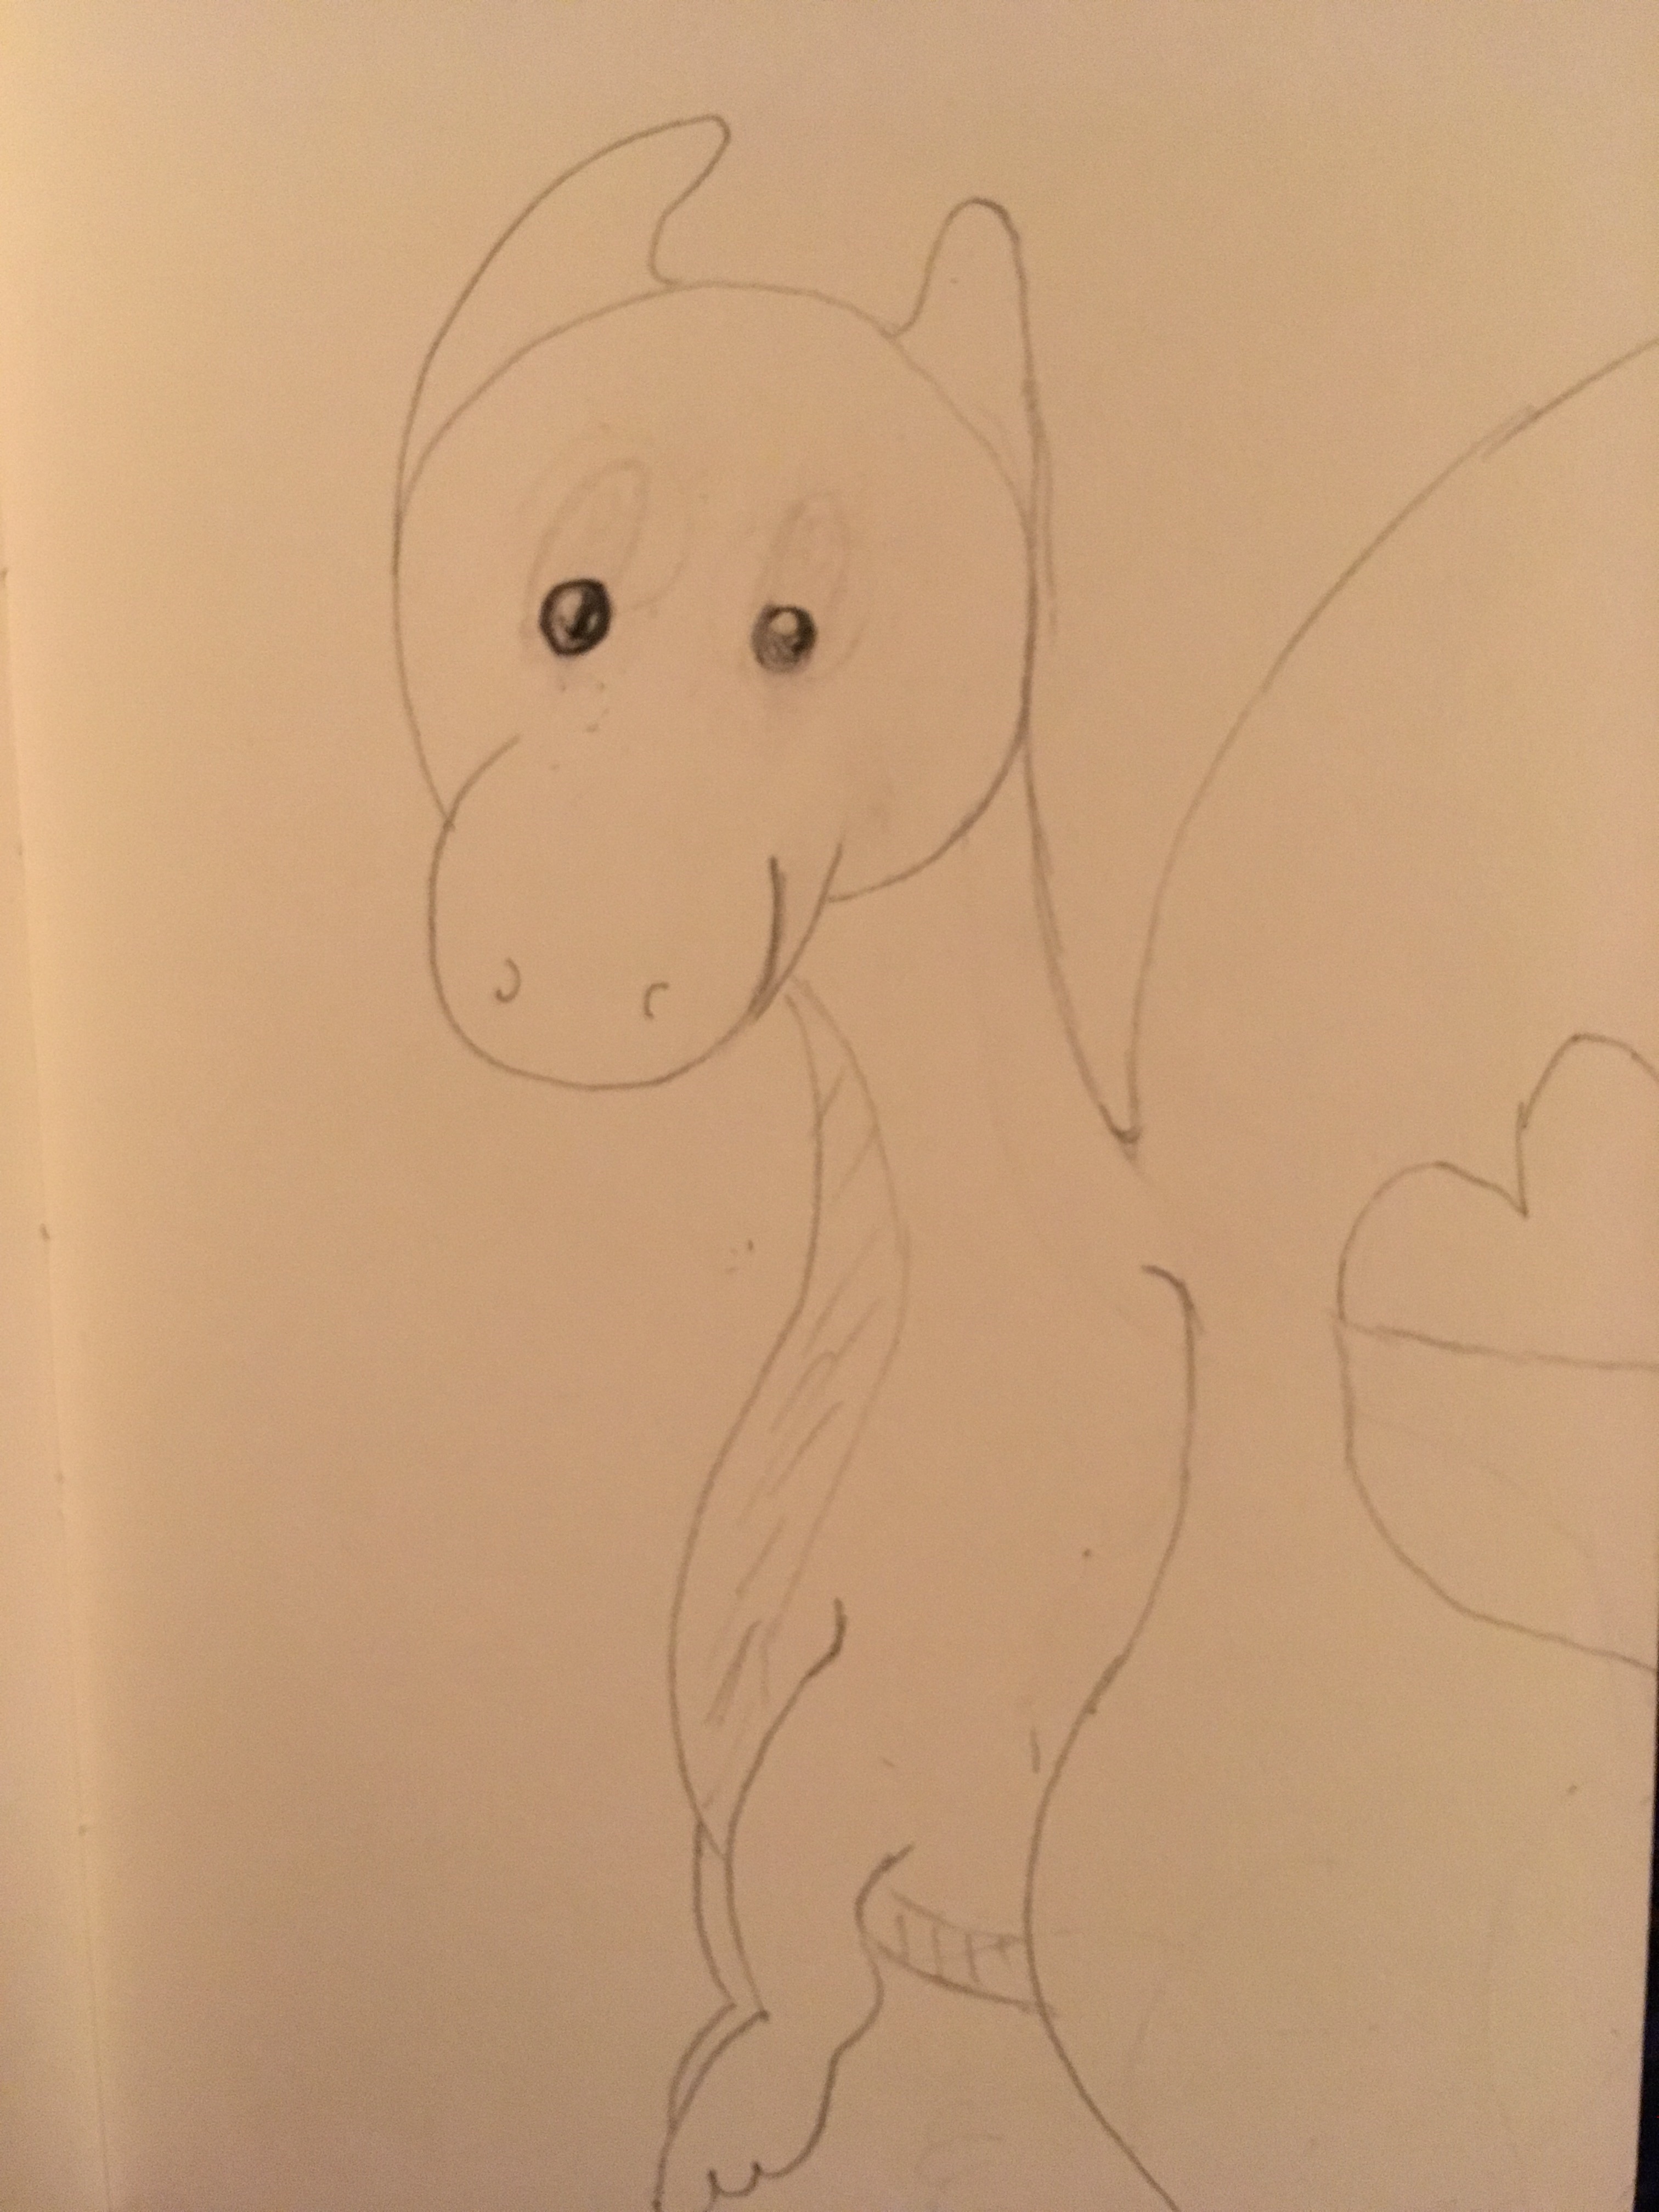 So Maybe I Draw Too Hard Drawing Dragons Day 199 Kate Ristau